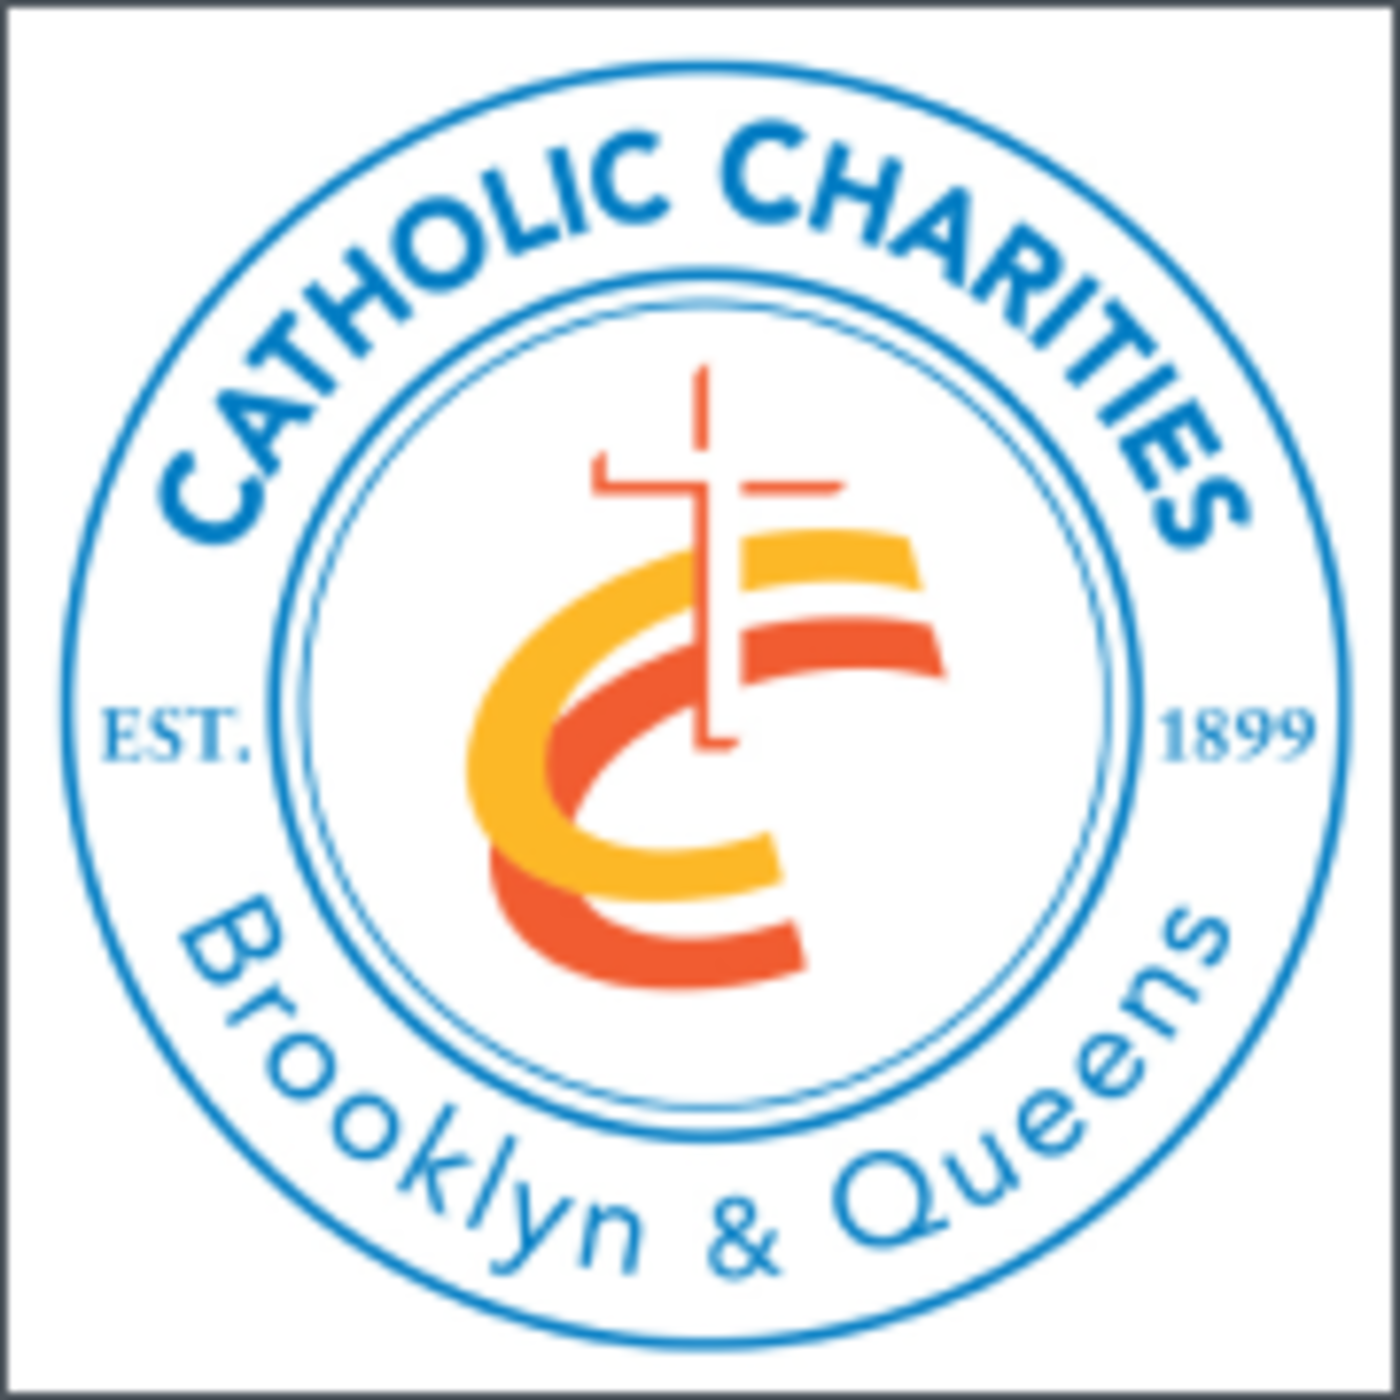 Catholic Charities of Brooklyn and Queens